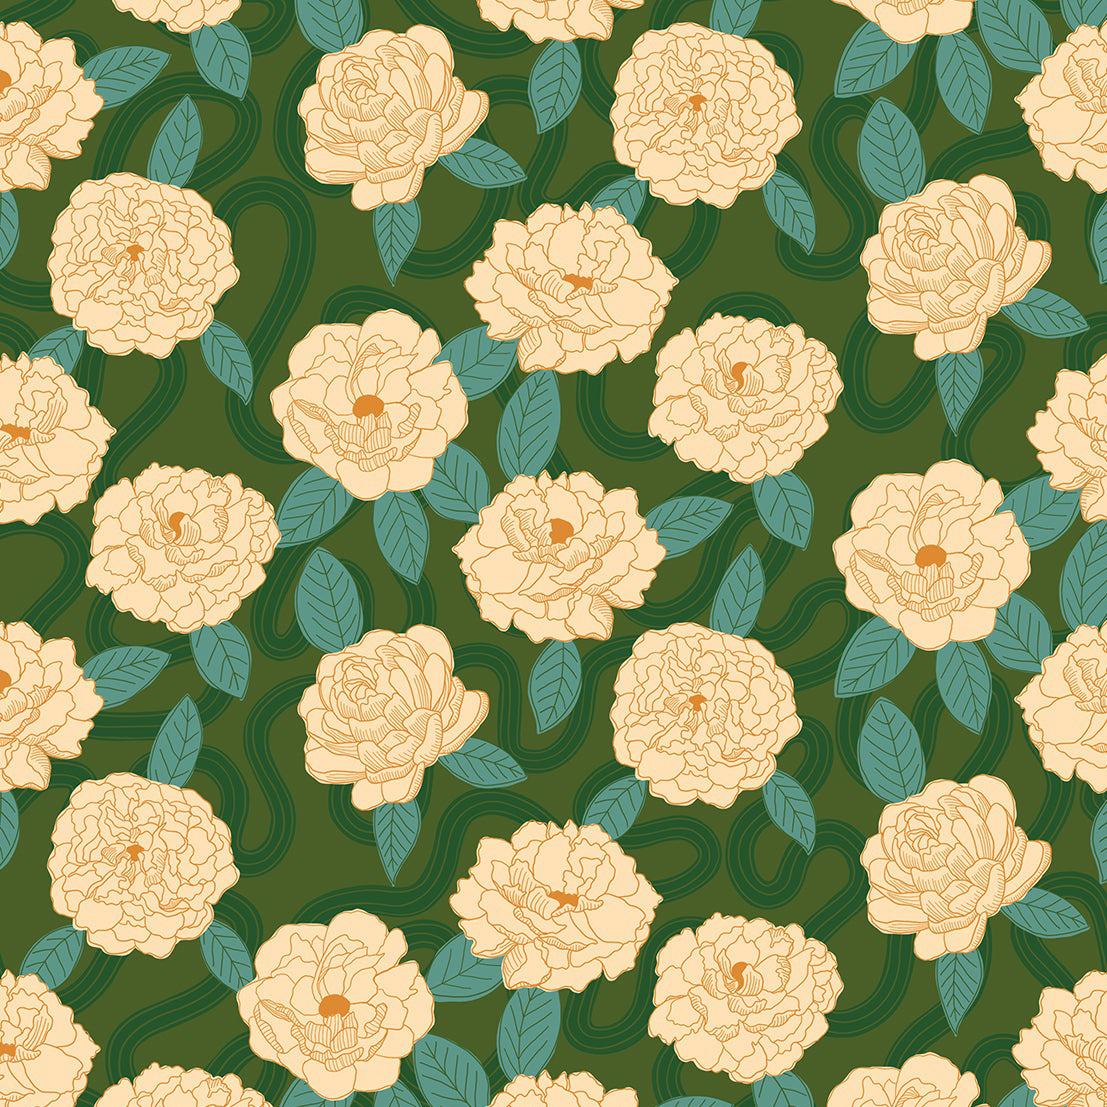 Ruby Star Society-Peonies Sarah Green-fabric-gather here online